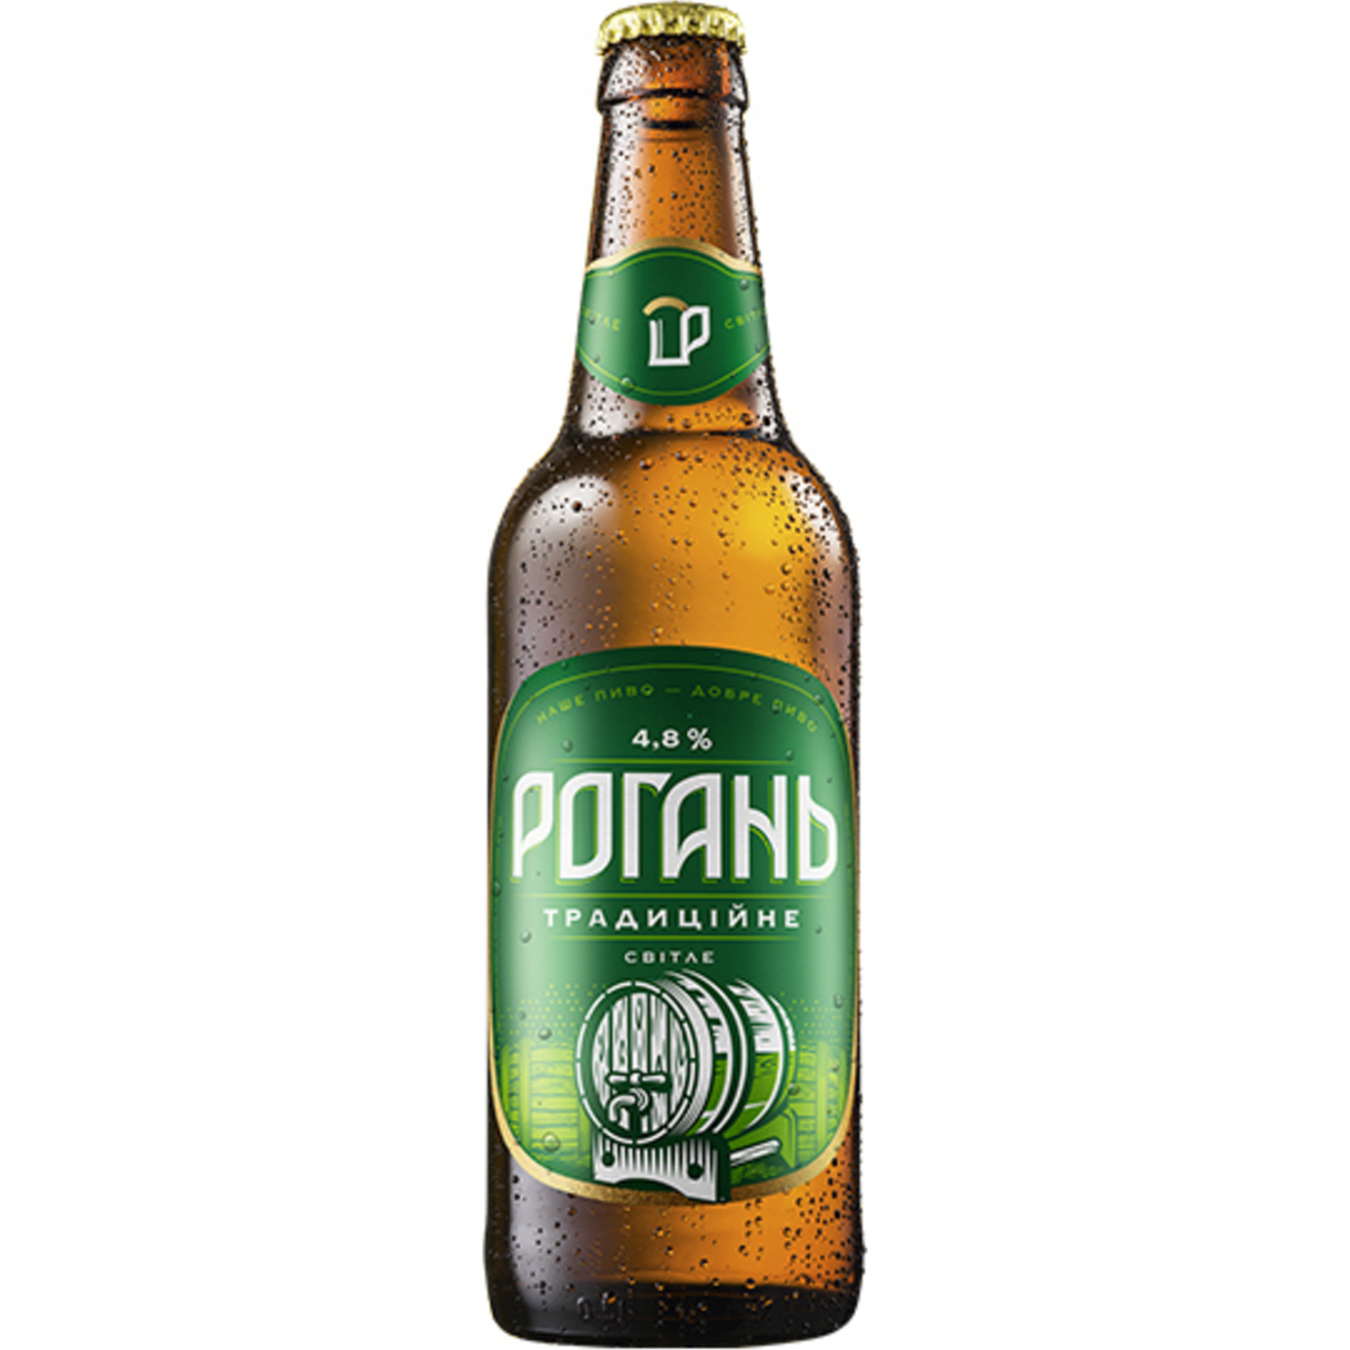 Light beer Rohan Traditional 4.8% 0.5 l